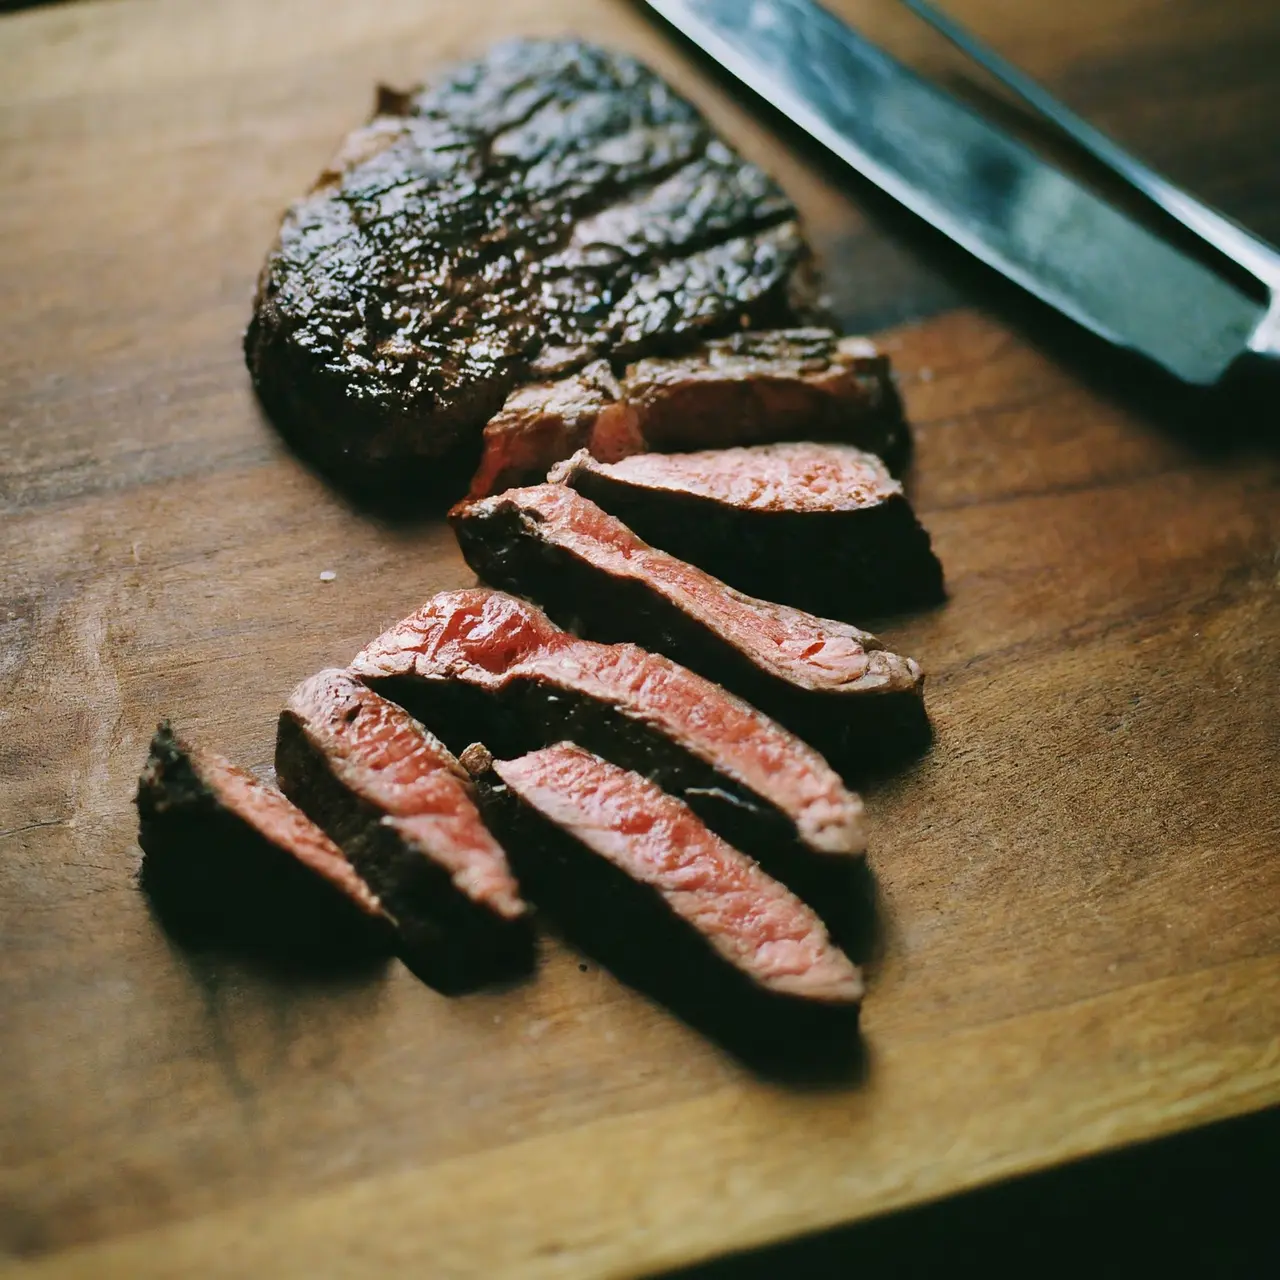 Juicy bison steak on a wooden cutting board. 35mm stock photo